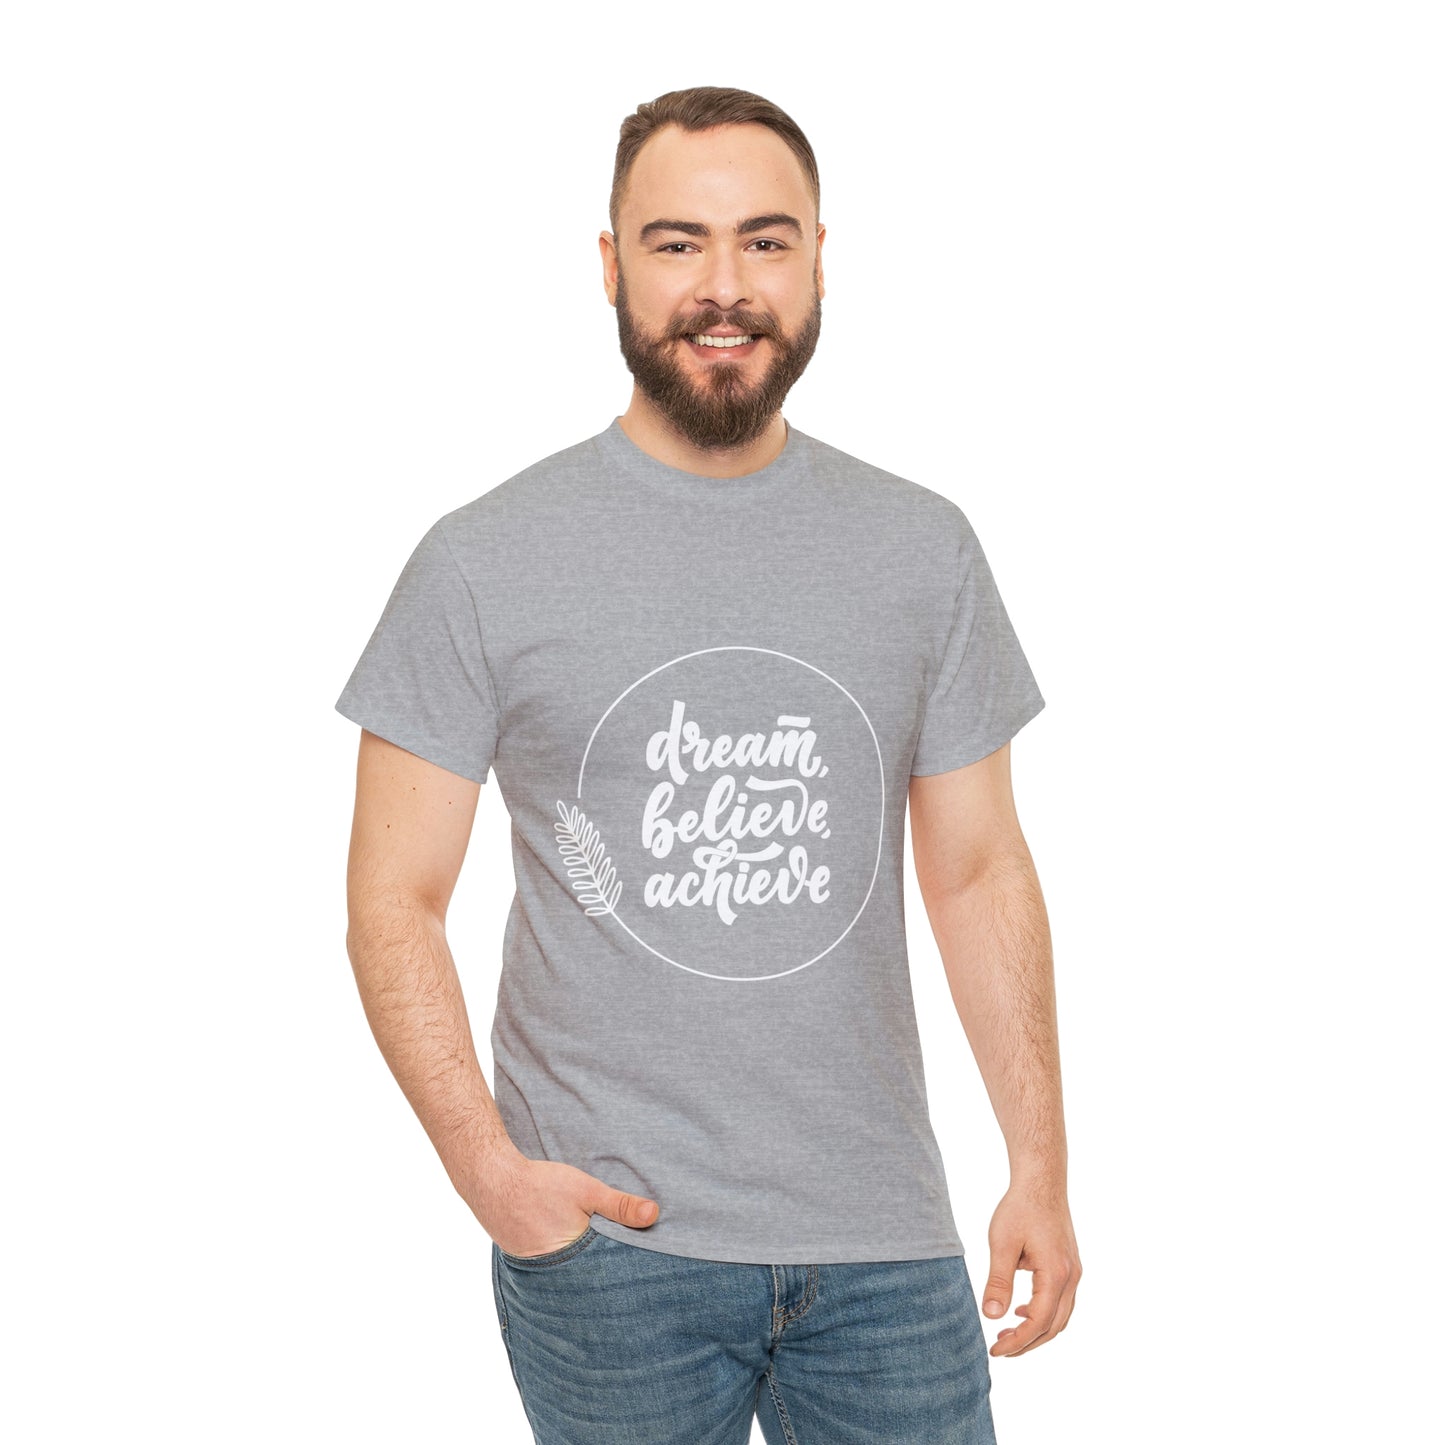 Dream Quote Your Style Our Custom Printed Tee Unique Design Comfortable Fit Personalized for You color, funny tshirt tee shirt motivation